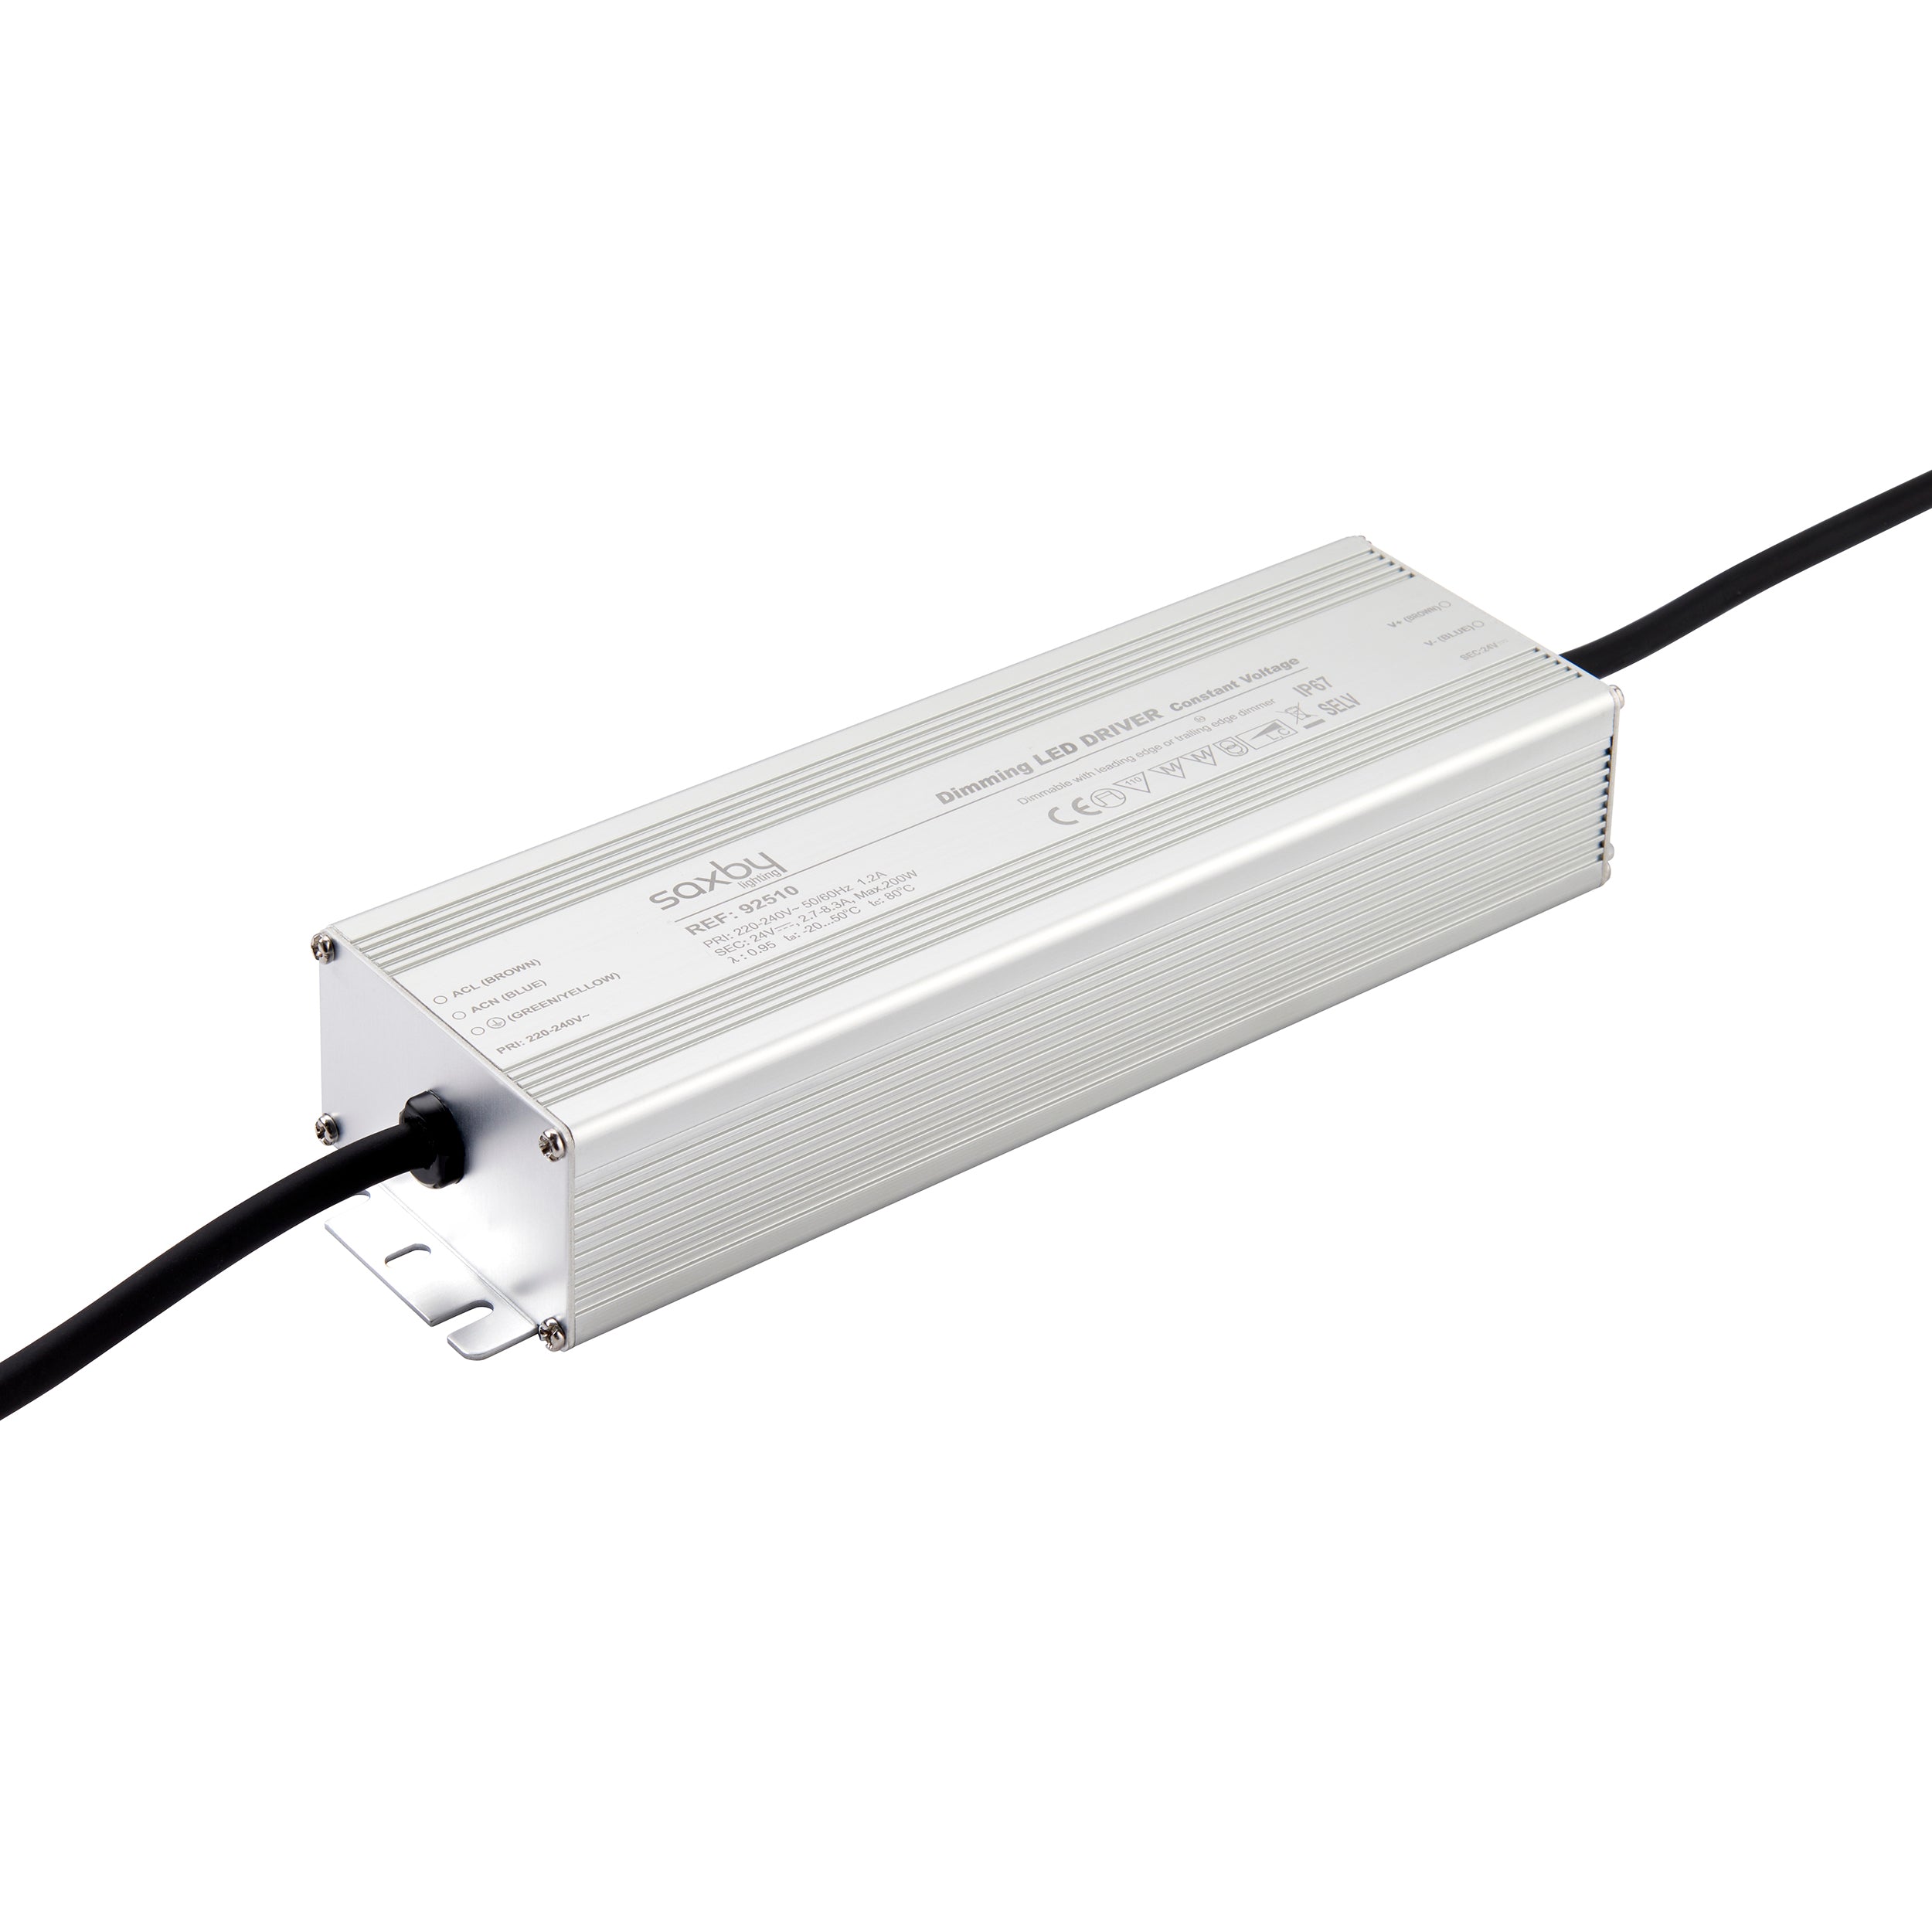 LED Driver Constant Voltage 24V 200W Dimmable IP67